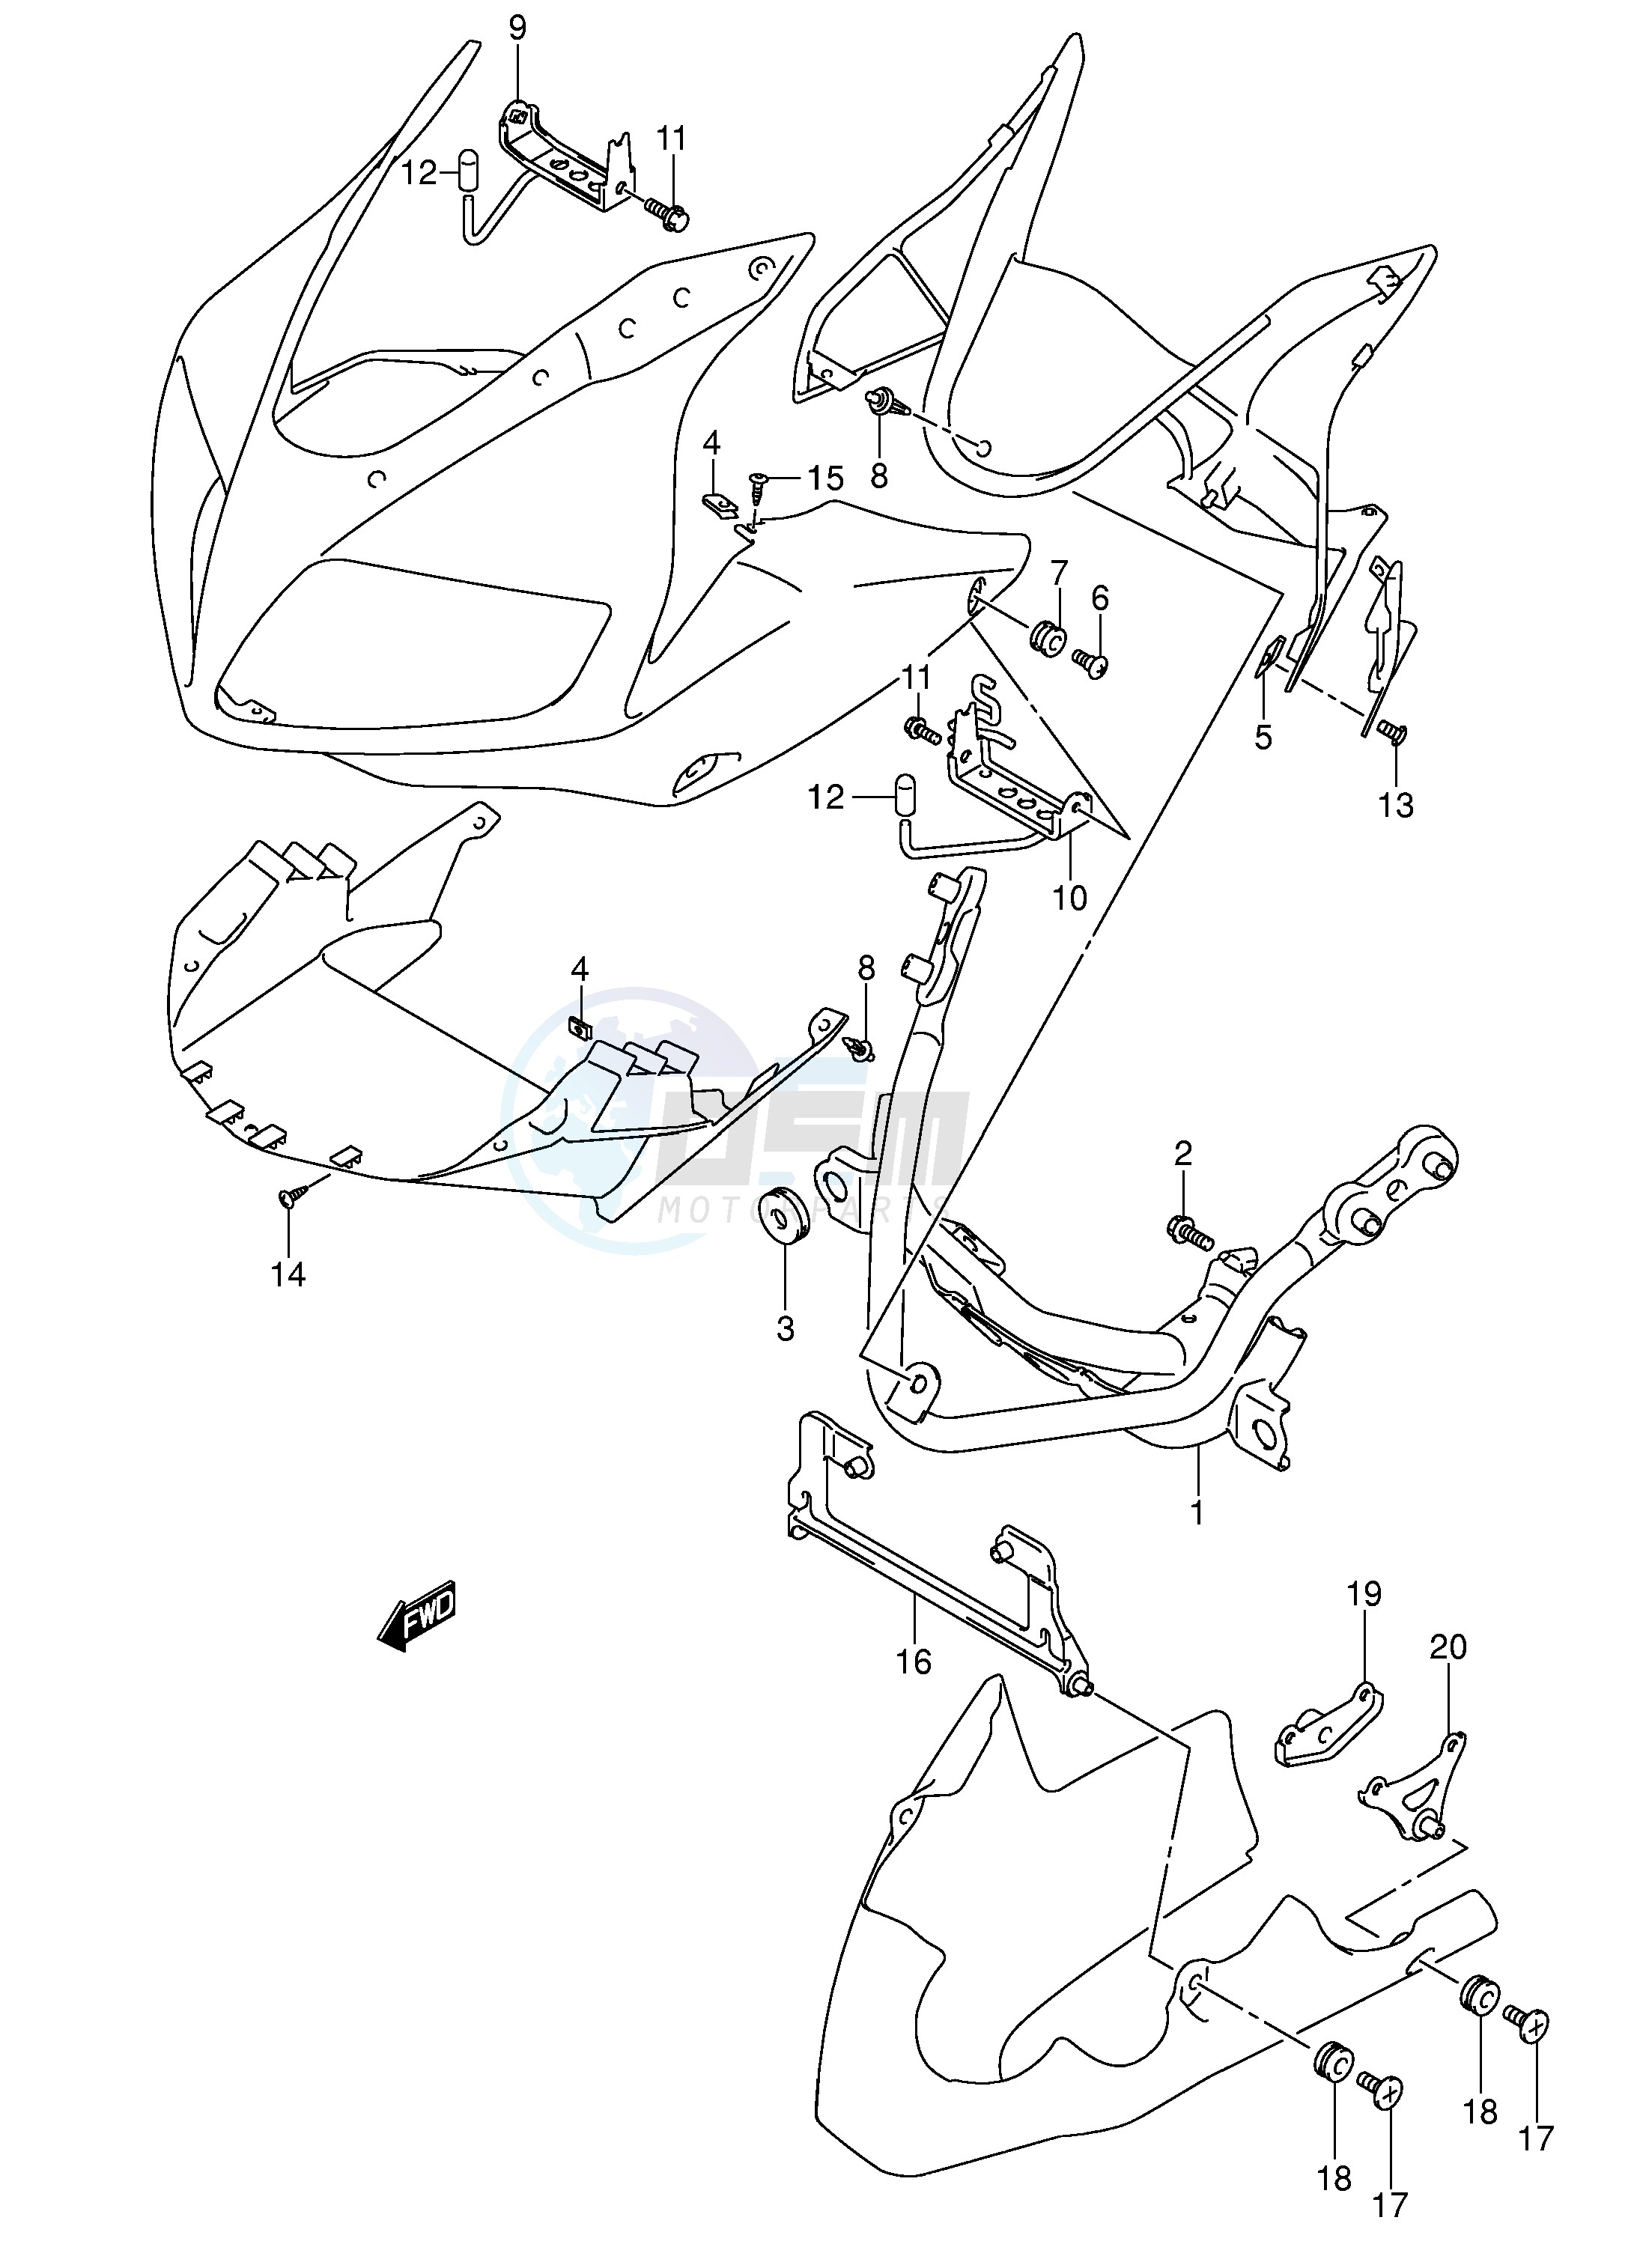 COWLING INSTALLATION PARTS (SV1000S S1 S2) blueprint